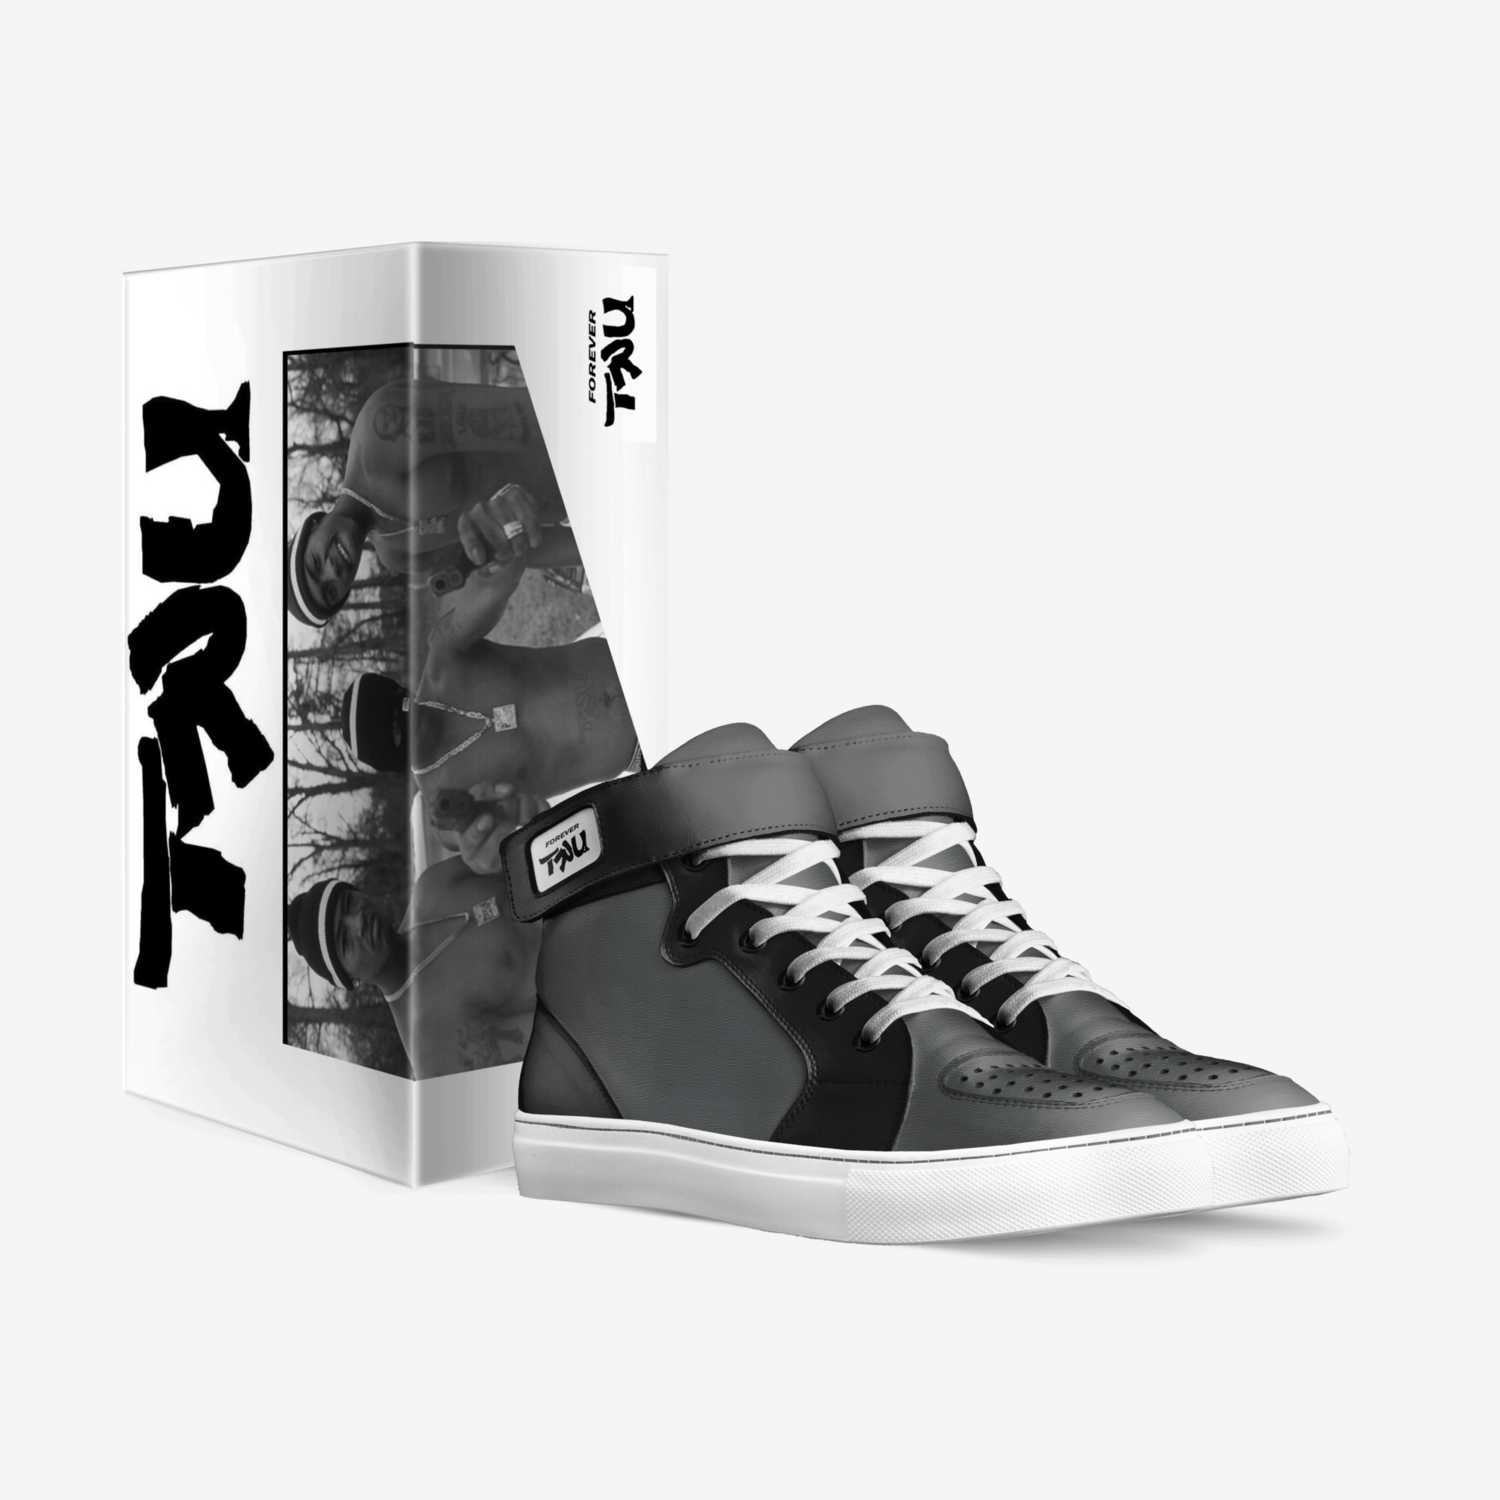 TRU custom made in Italy shoes by Louie Lopez | Box view